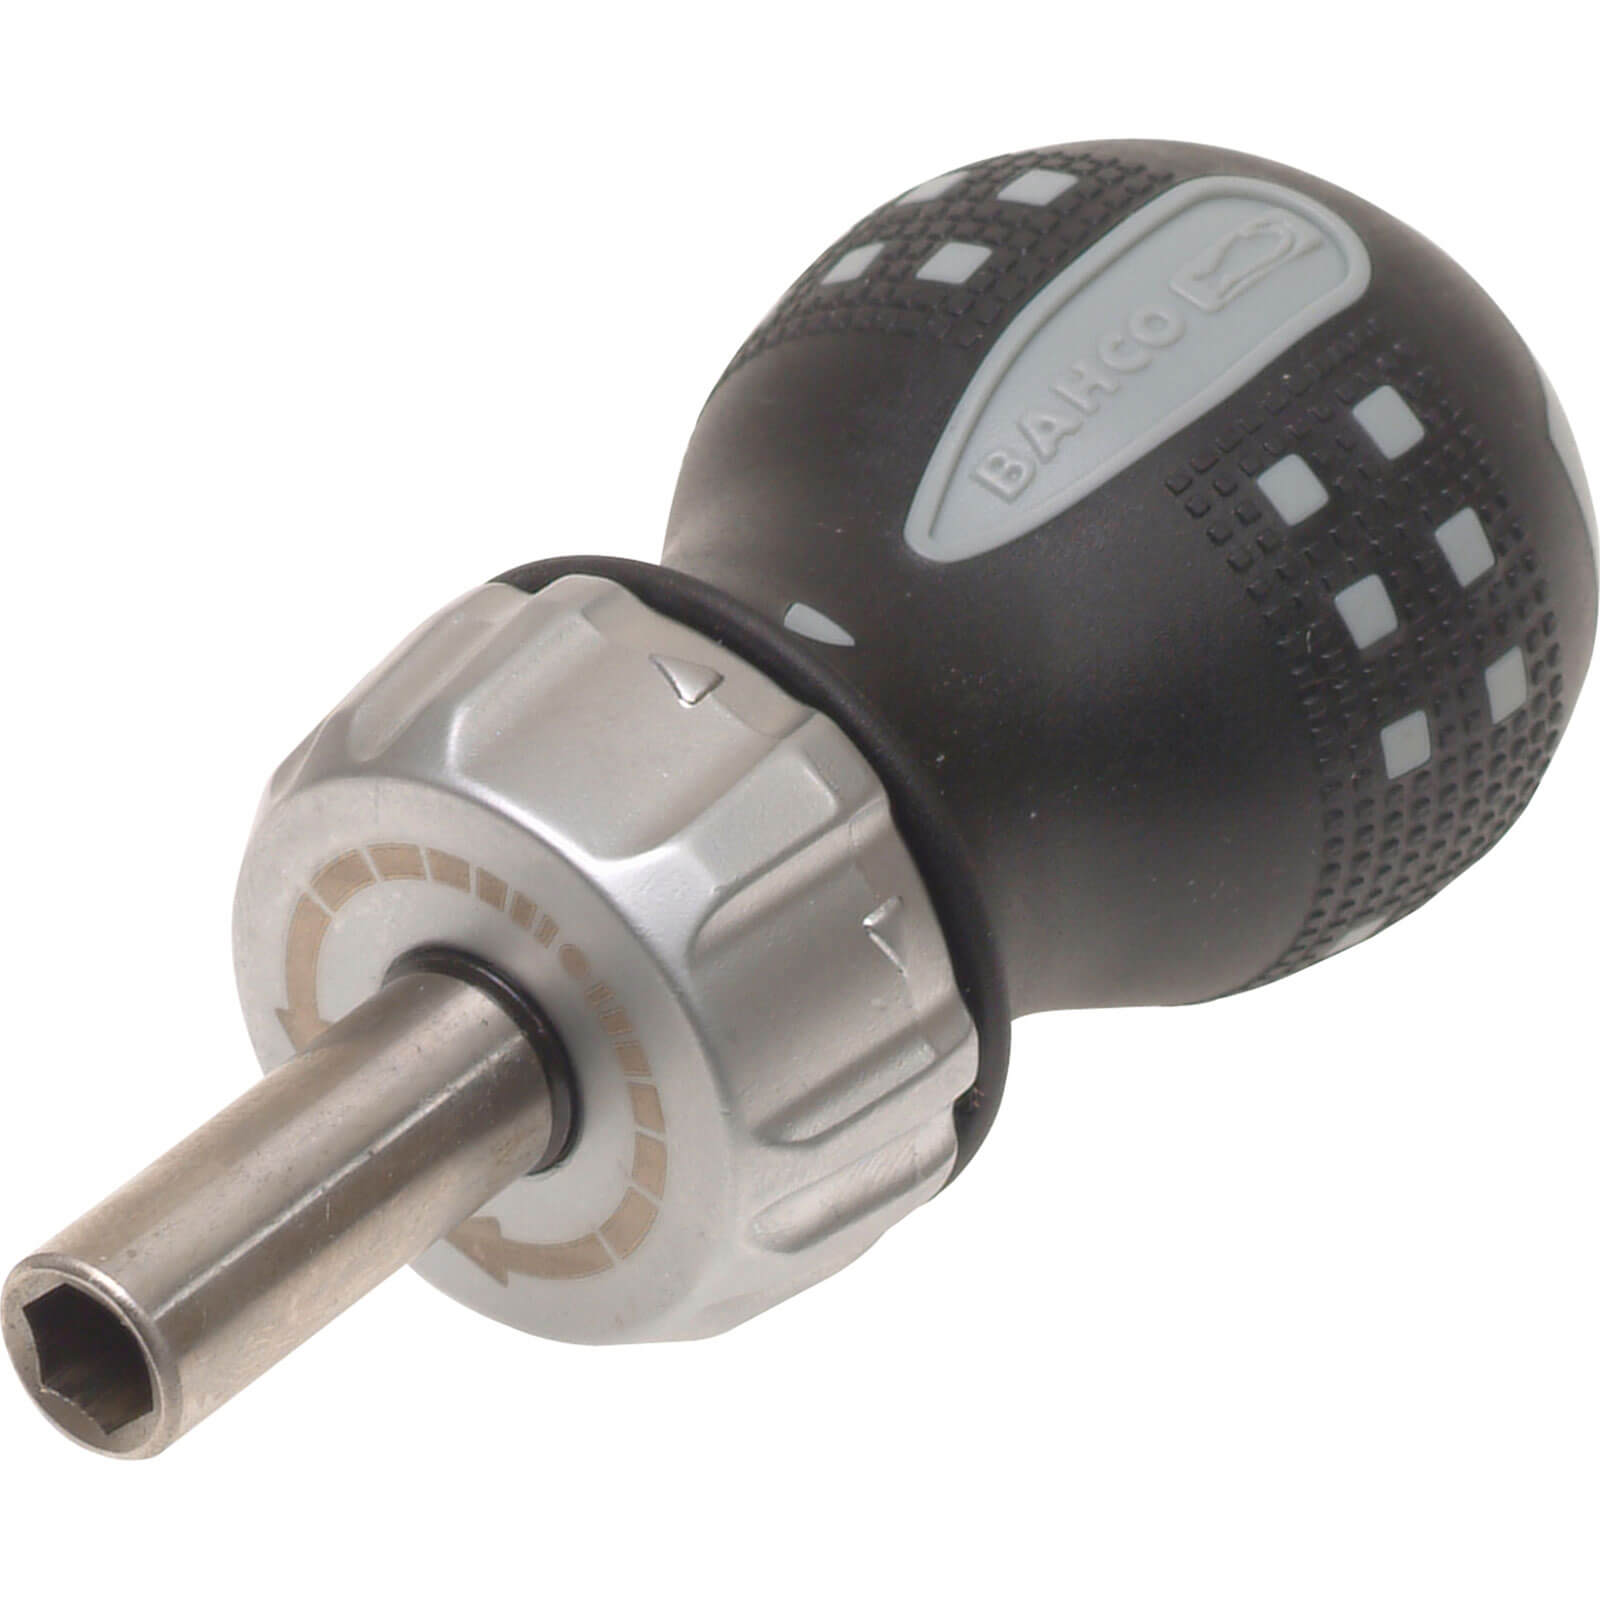 Image of Bahco Stubby Ratchet Screwdriver